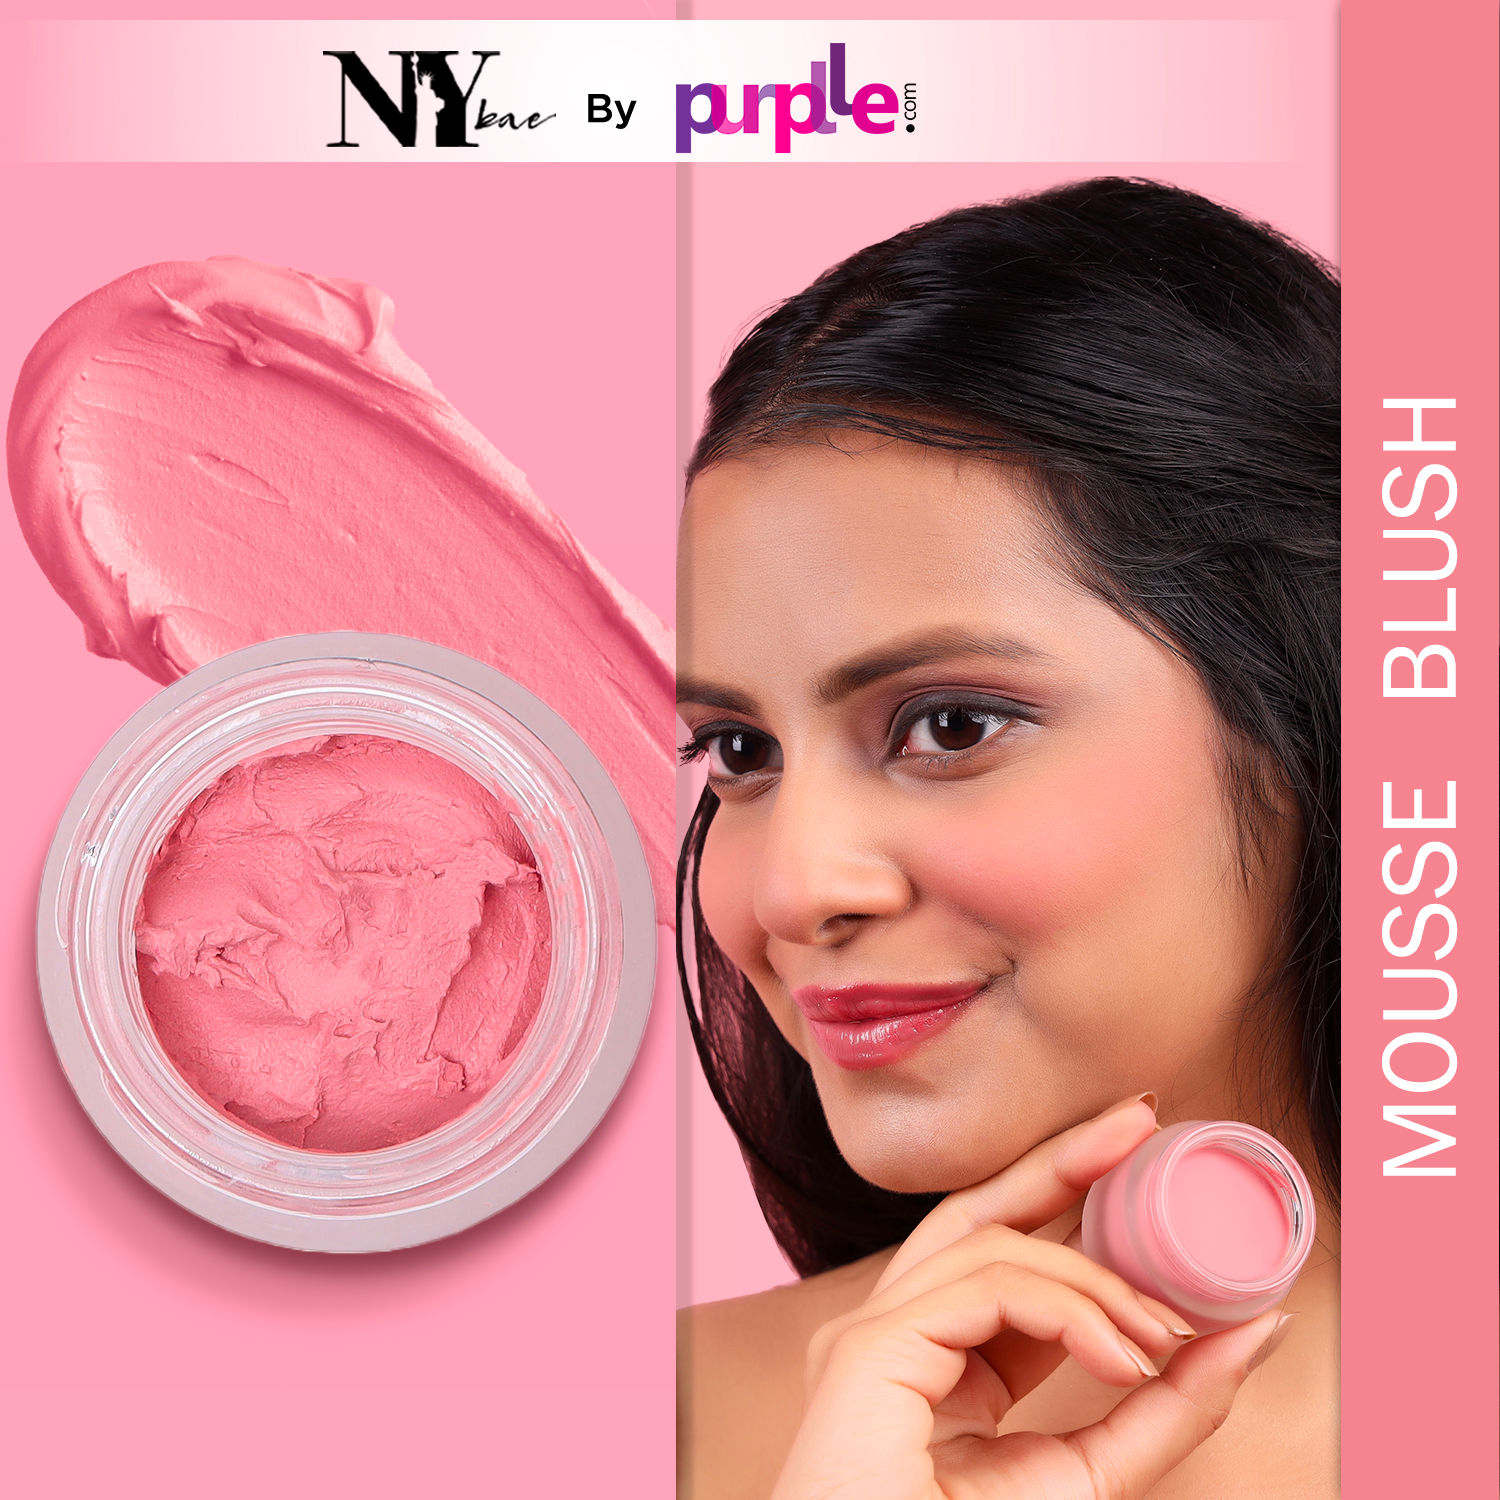 NY Bae Mousse Blush - Pink Blossom 03 (10 gm) | Pink Peach | Natural Matte Finish | Satin Soft | Highly Pigmented | Lightweight | Super Blendable